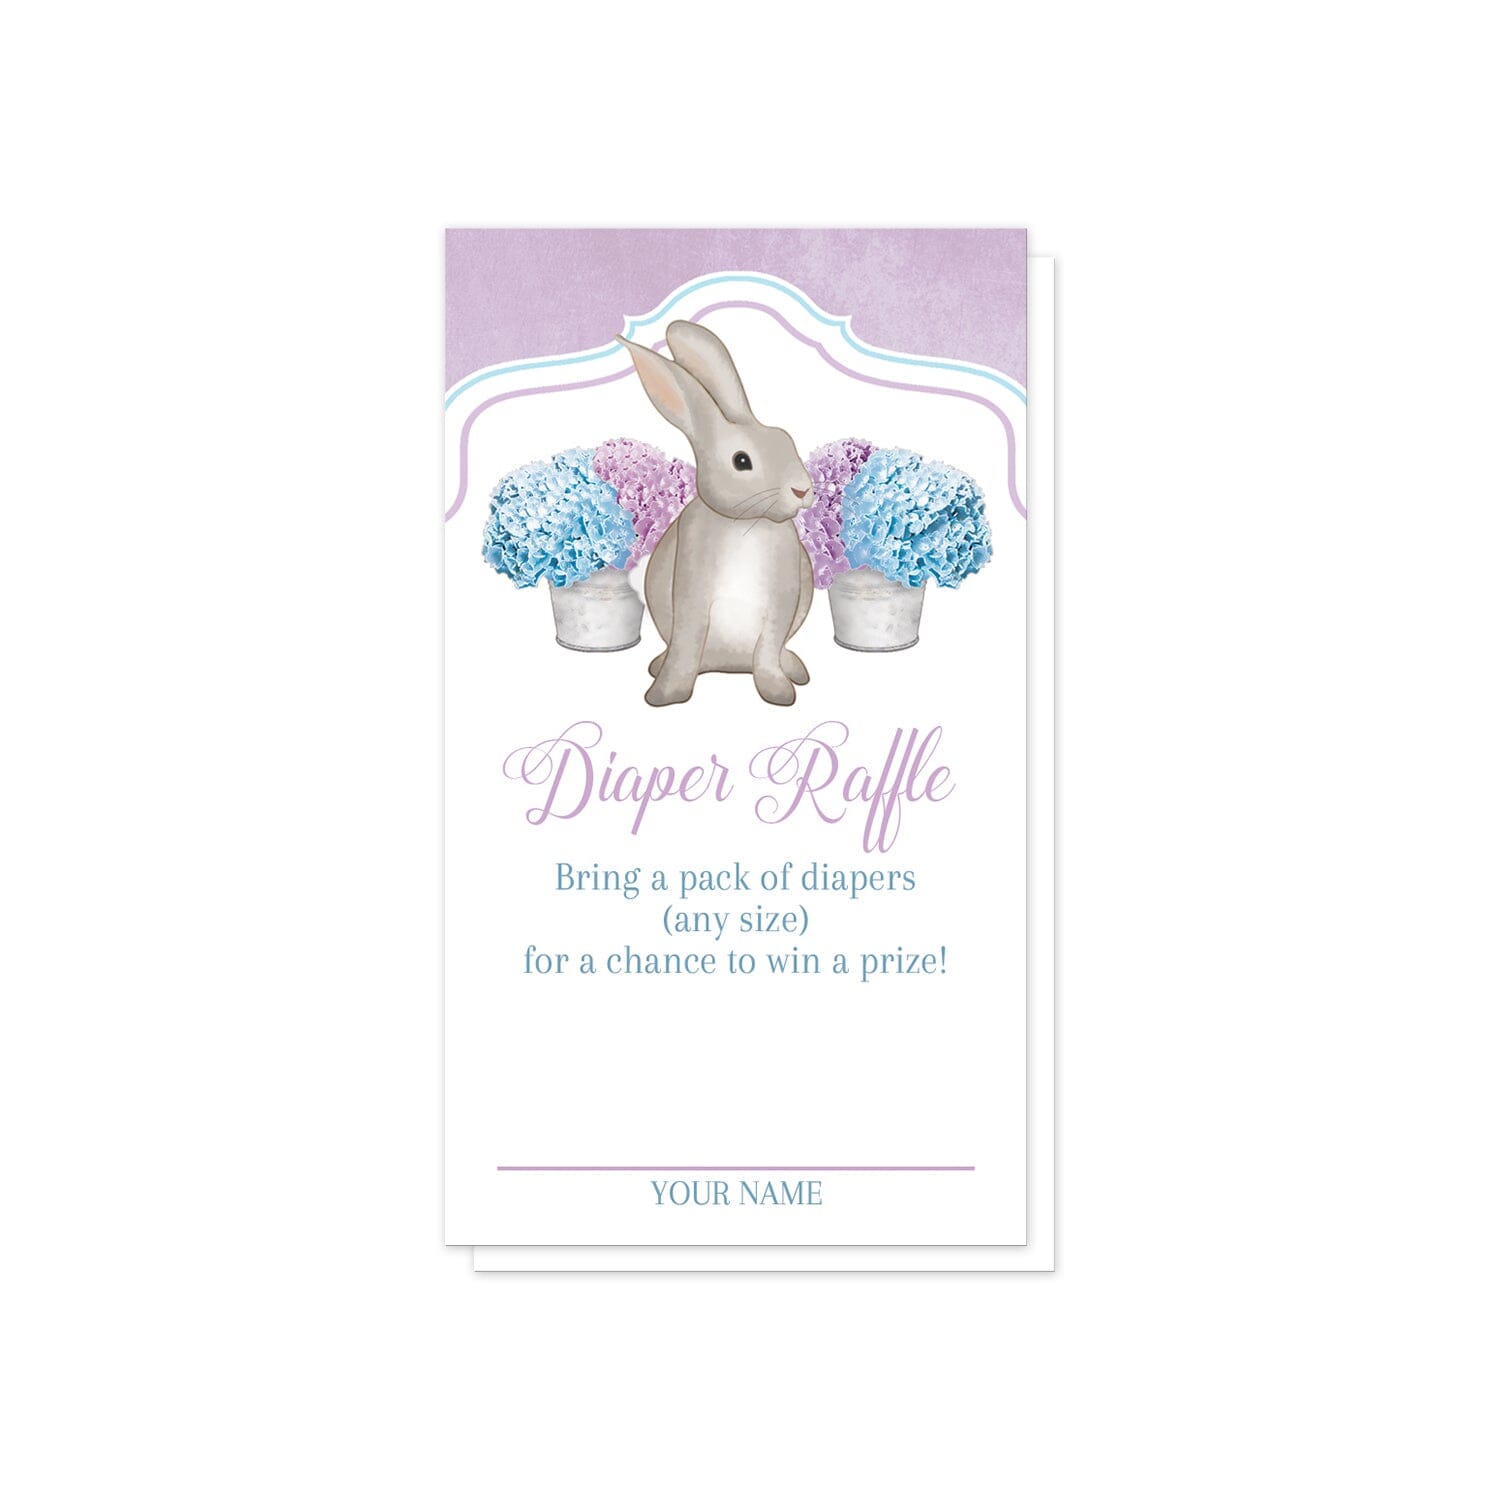 Purple Blue Hydrangea Rabbit Diaper Raffle Cards at Artistically Invited. Adorable purple blue hydrangea rabbit diaper raffle cards with a watercolor-inspired illustration of cute little brown bunny rabbit with blue and purple hydrangea floral arrangements in tin buckets behind it and a rustic purple background at the top. Your diaper raffle details are printed in purple and blue on white below the cute rabbit. 